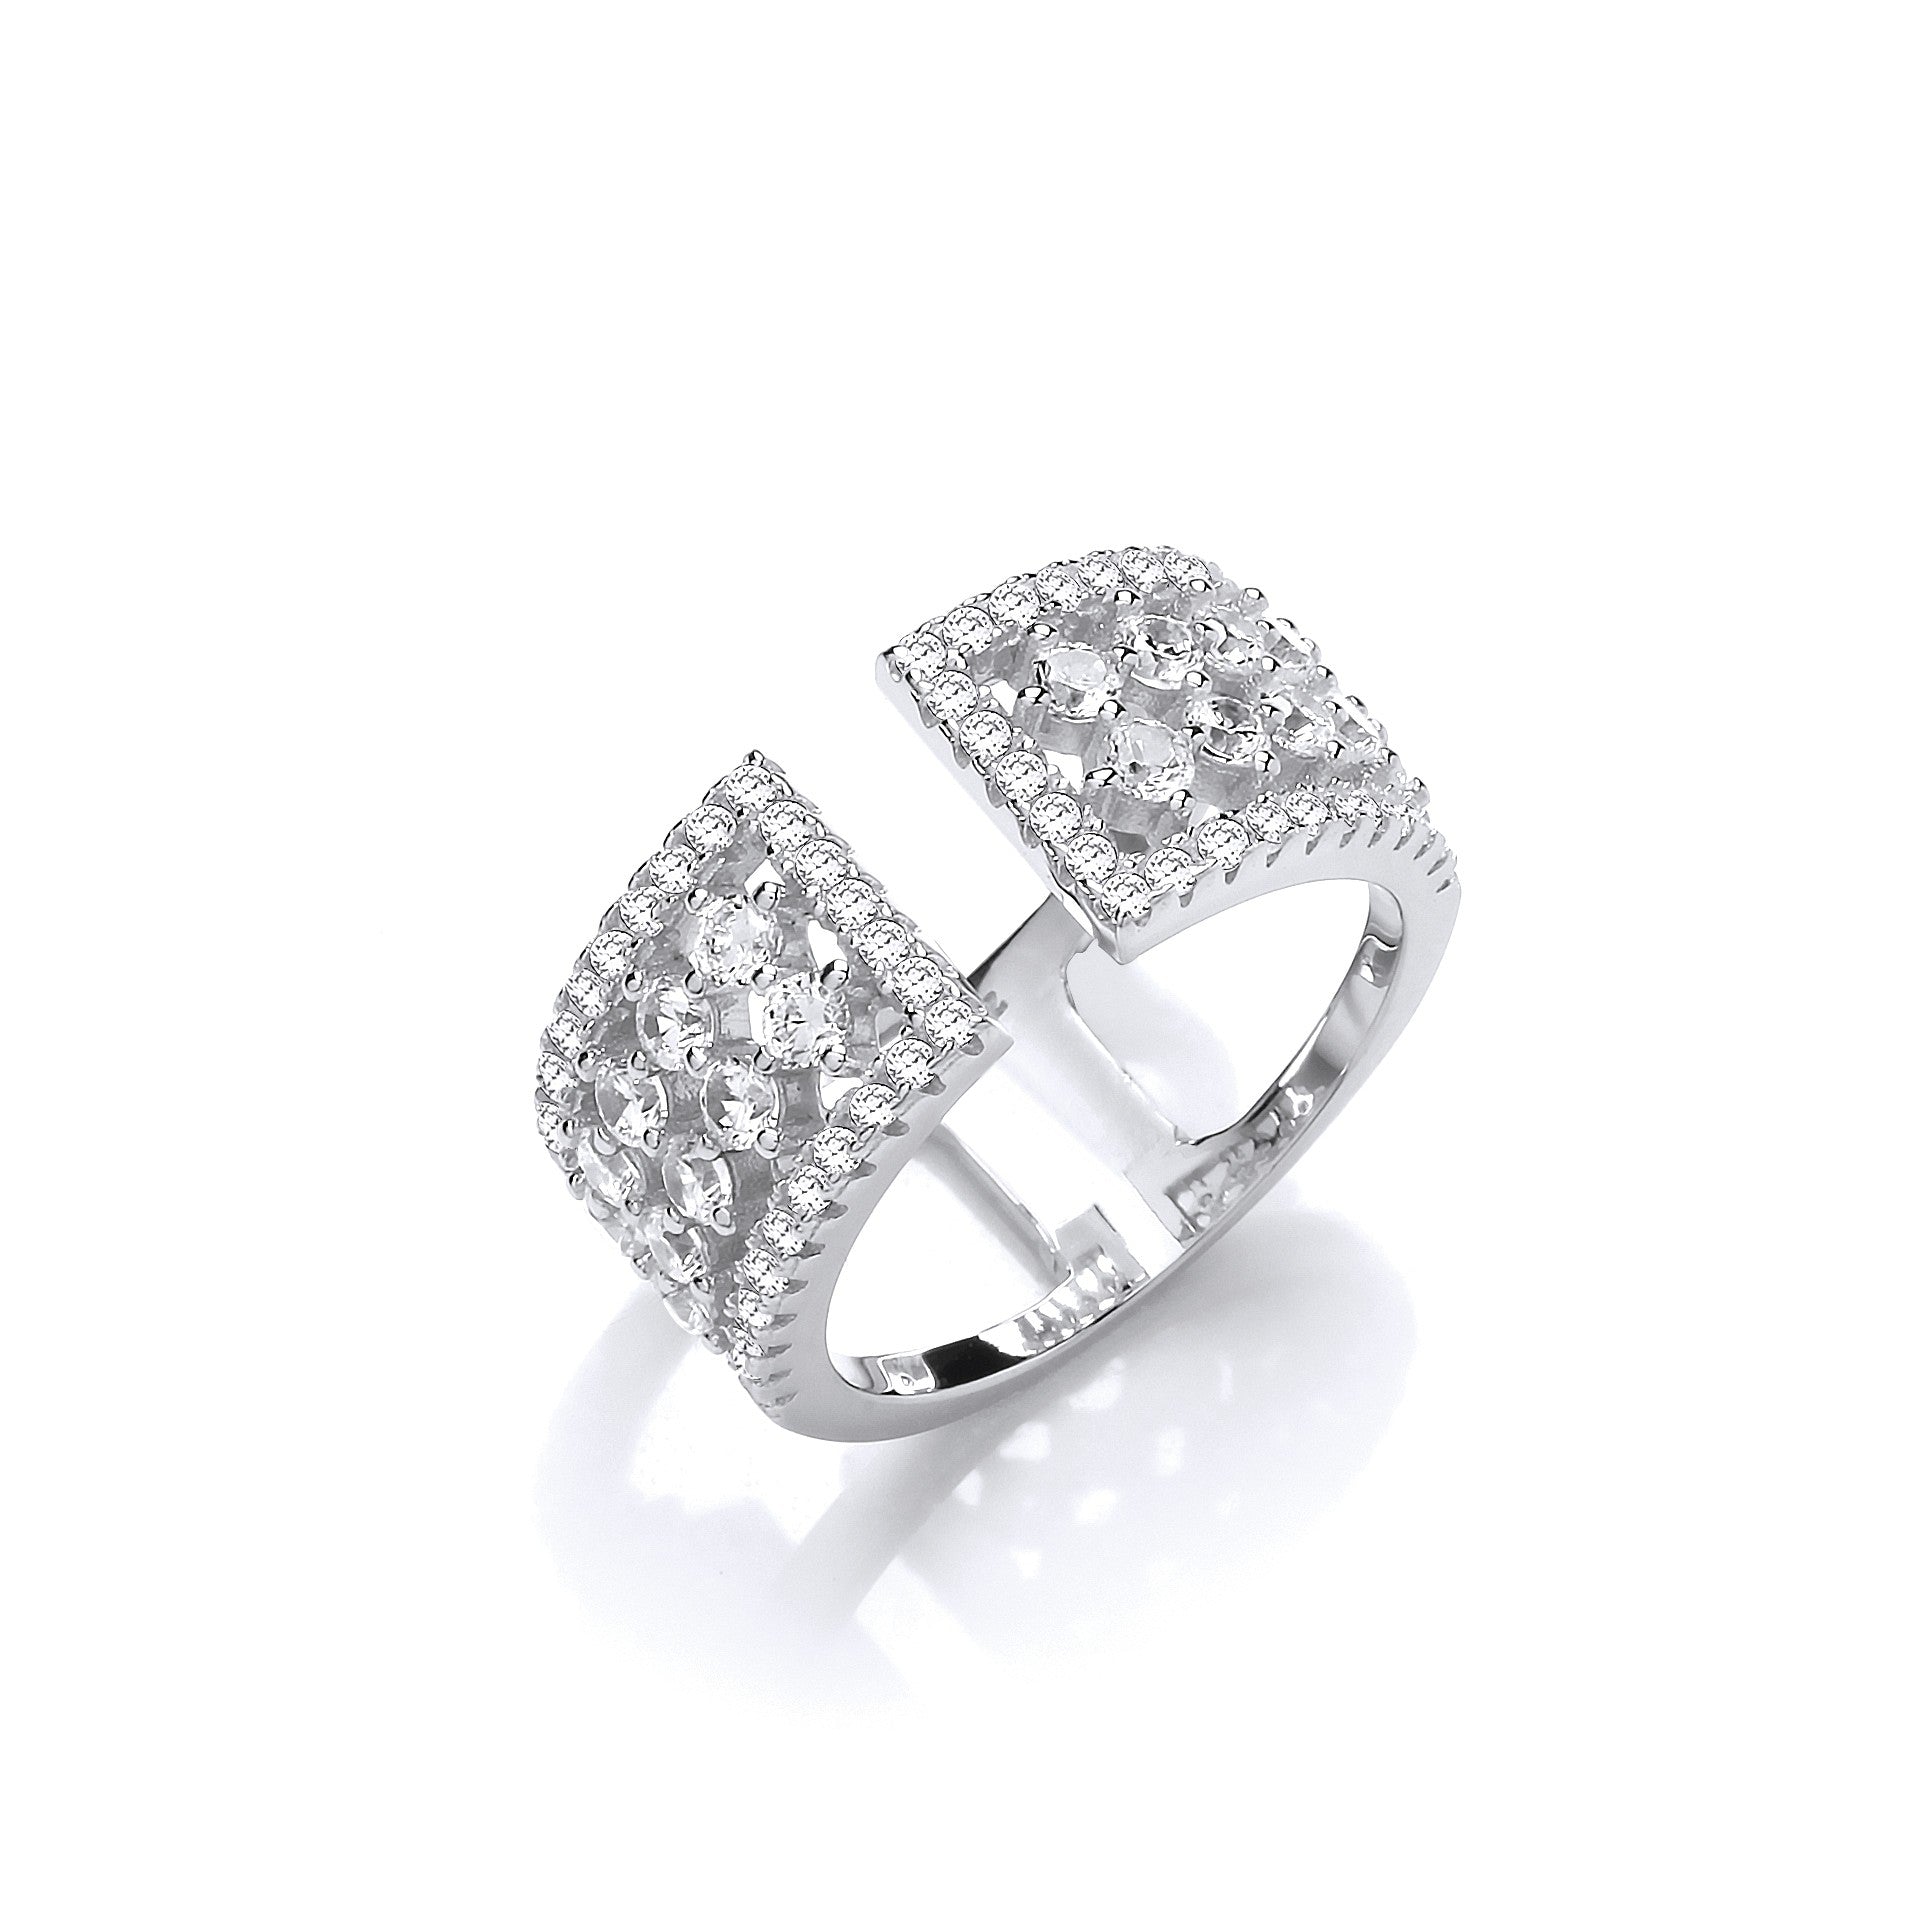 Silver Open Ring with Micro Pave Cubic Zirconia's